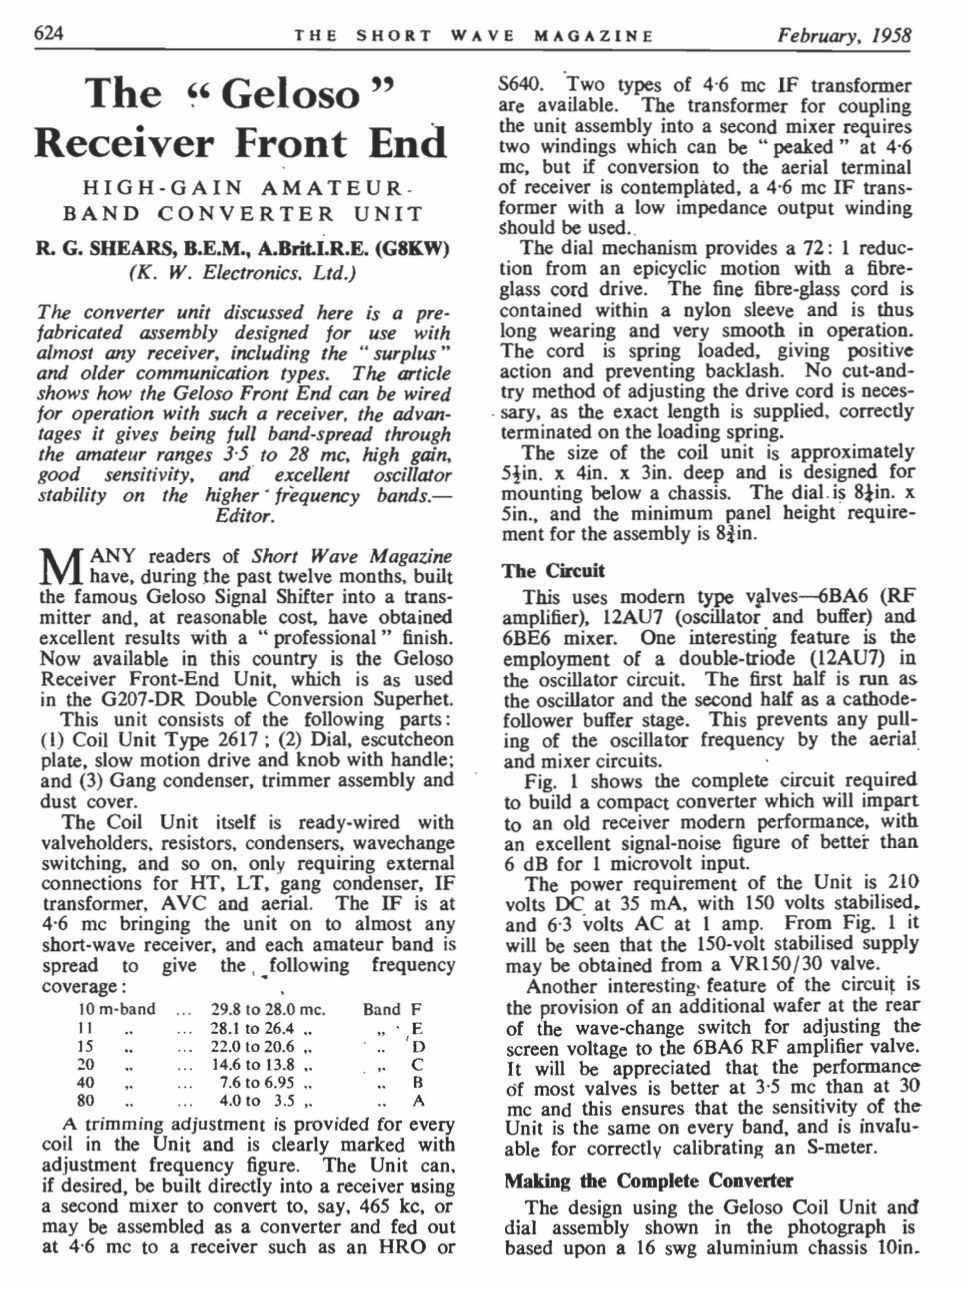 KW Vanguard - Discussing the Geloso Receiver Front End by Shortwave Magazine (1958-02)